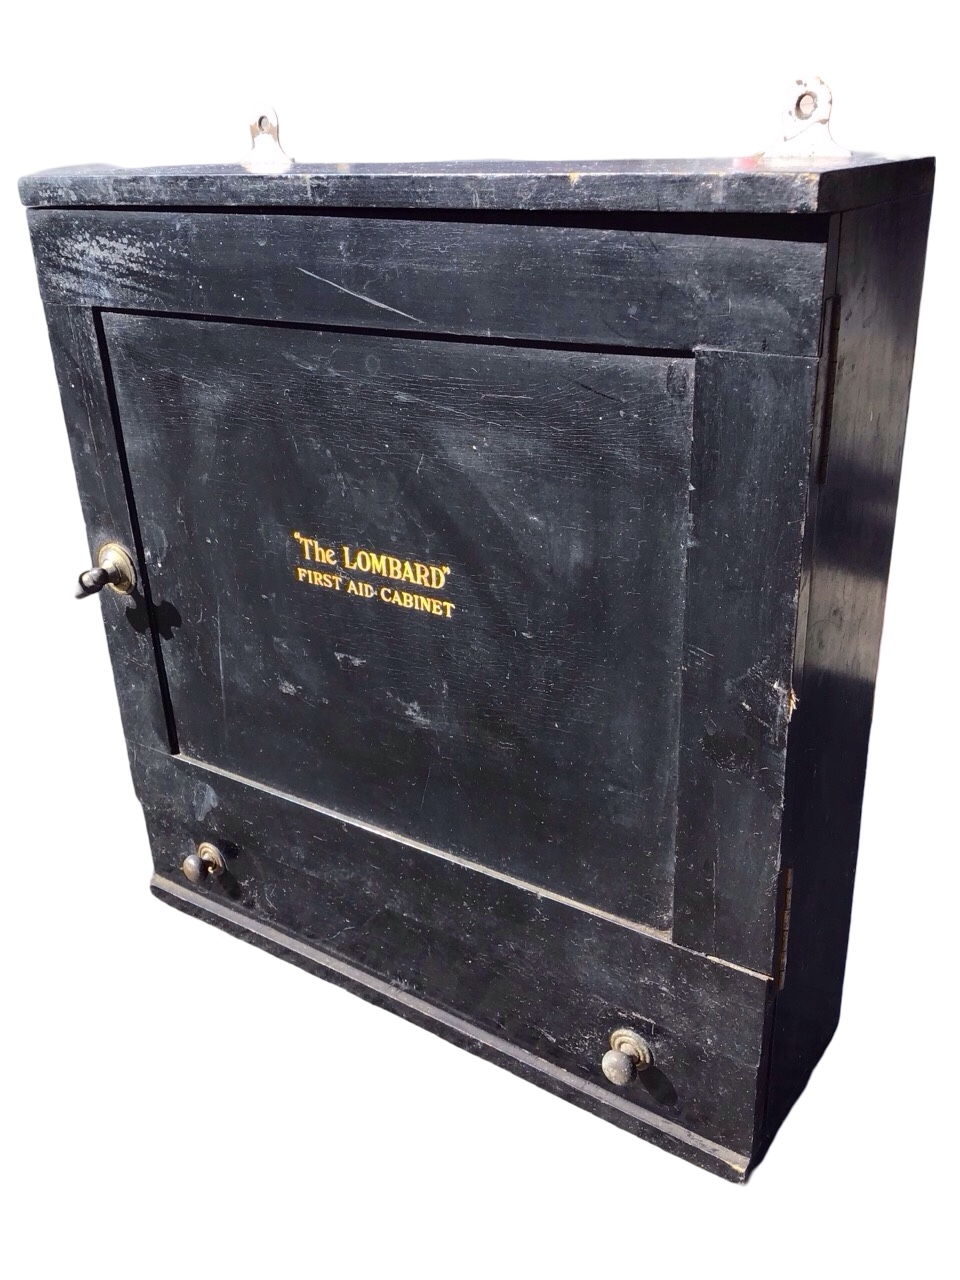 An Edwardian hanging ebonised first aid cabinet - The Lombard, with brass knobbed panelled door